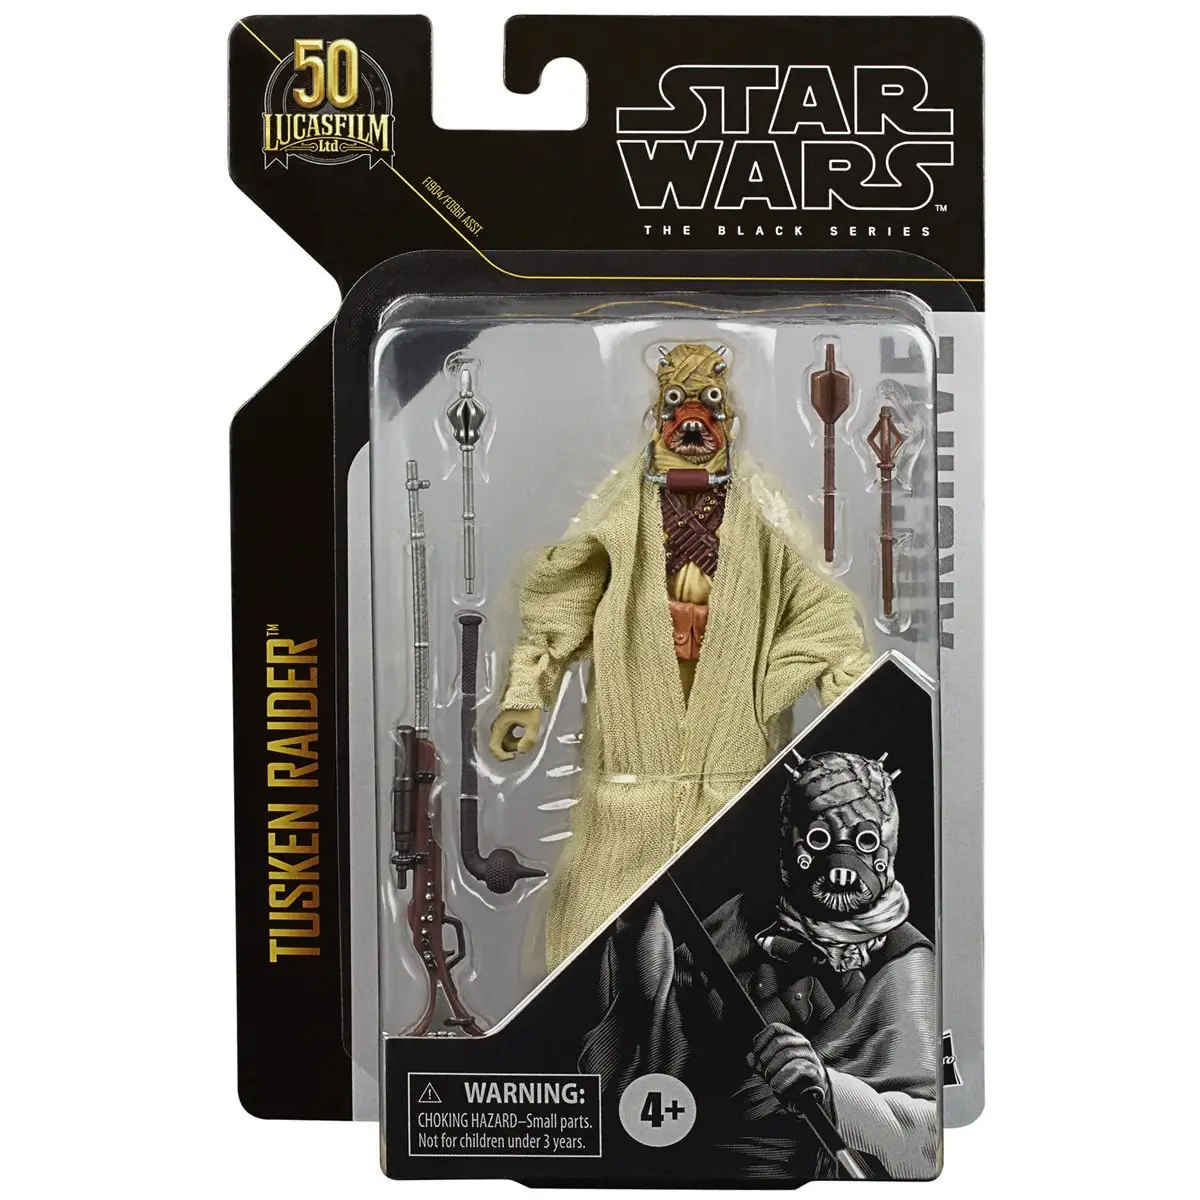 Recyclable Plastic PET Star-Wars The Black Series Archive Case Protector Box Collection Figure Display Case